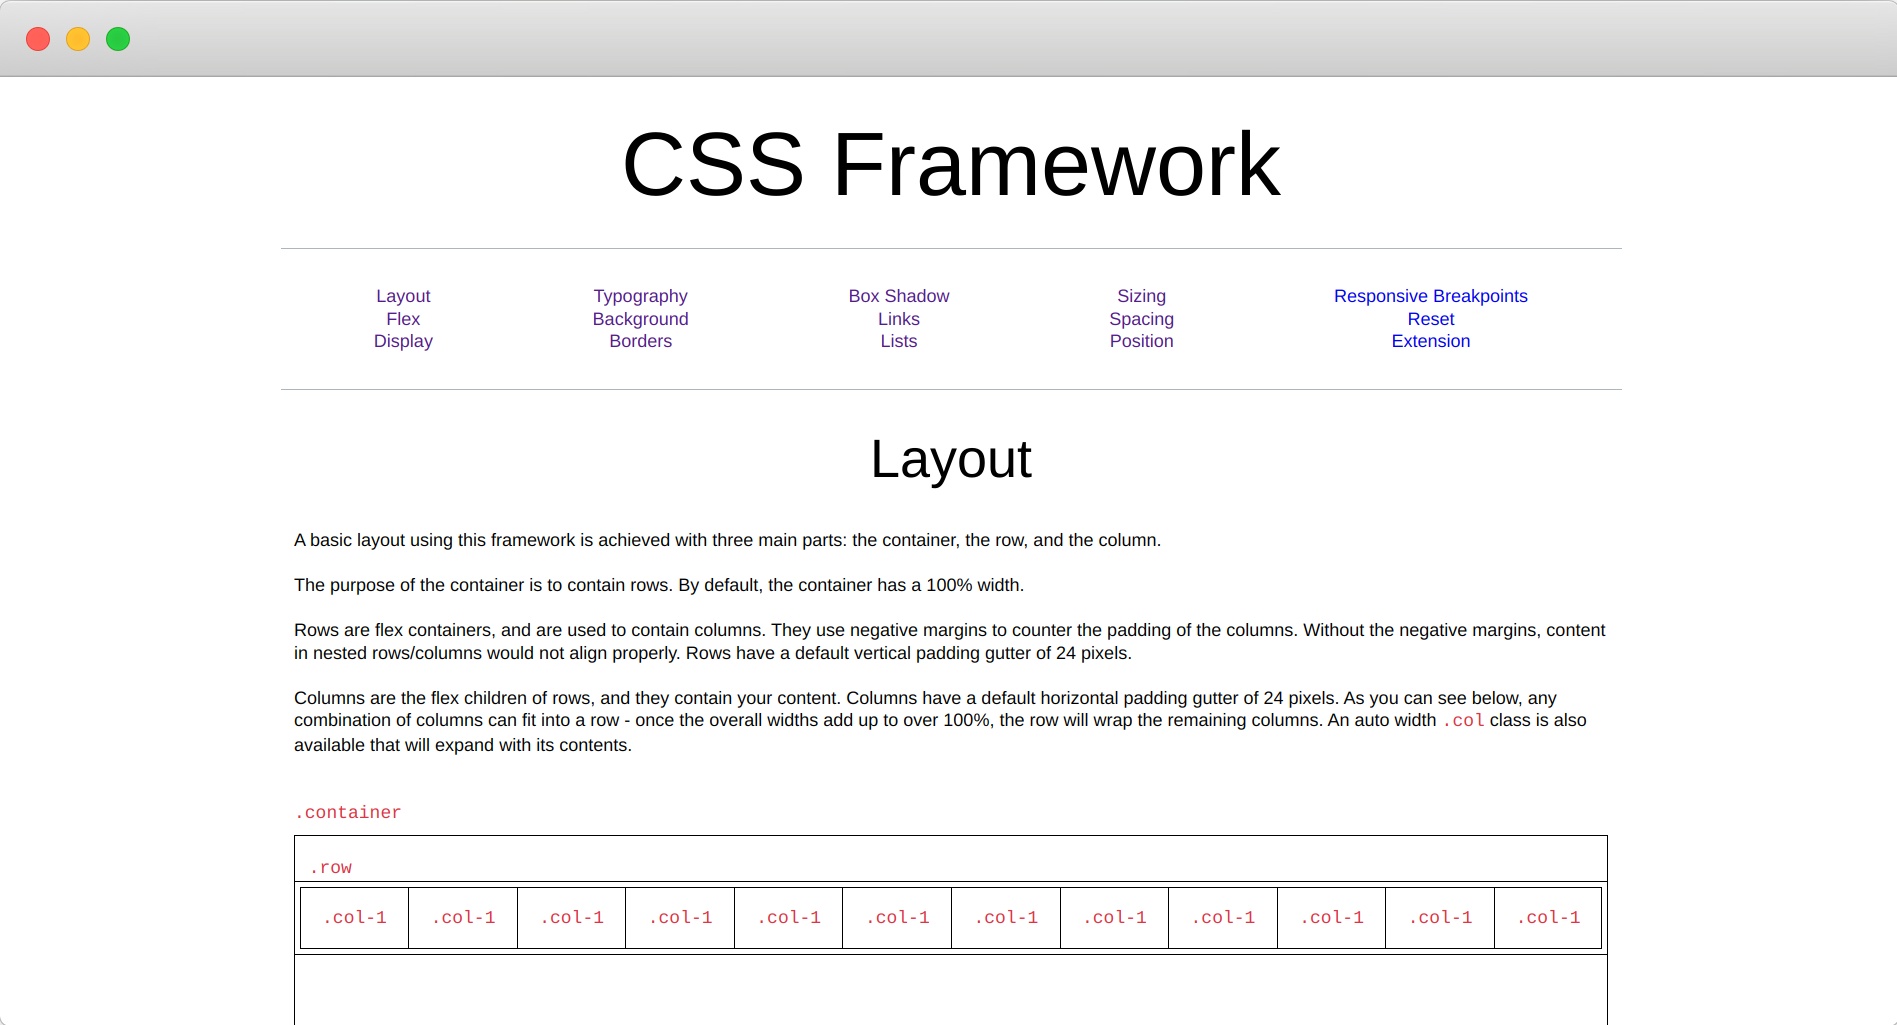 this is an image of the css-framework app